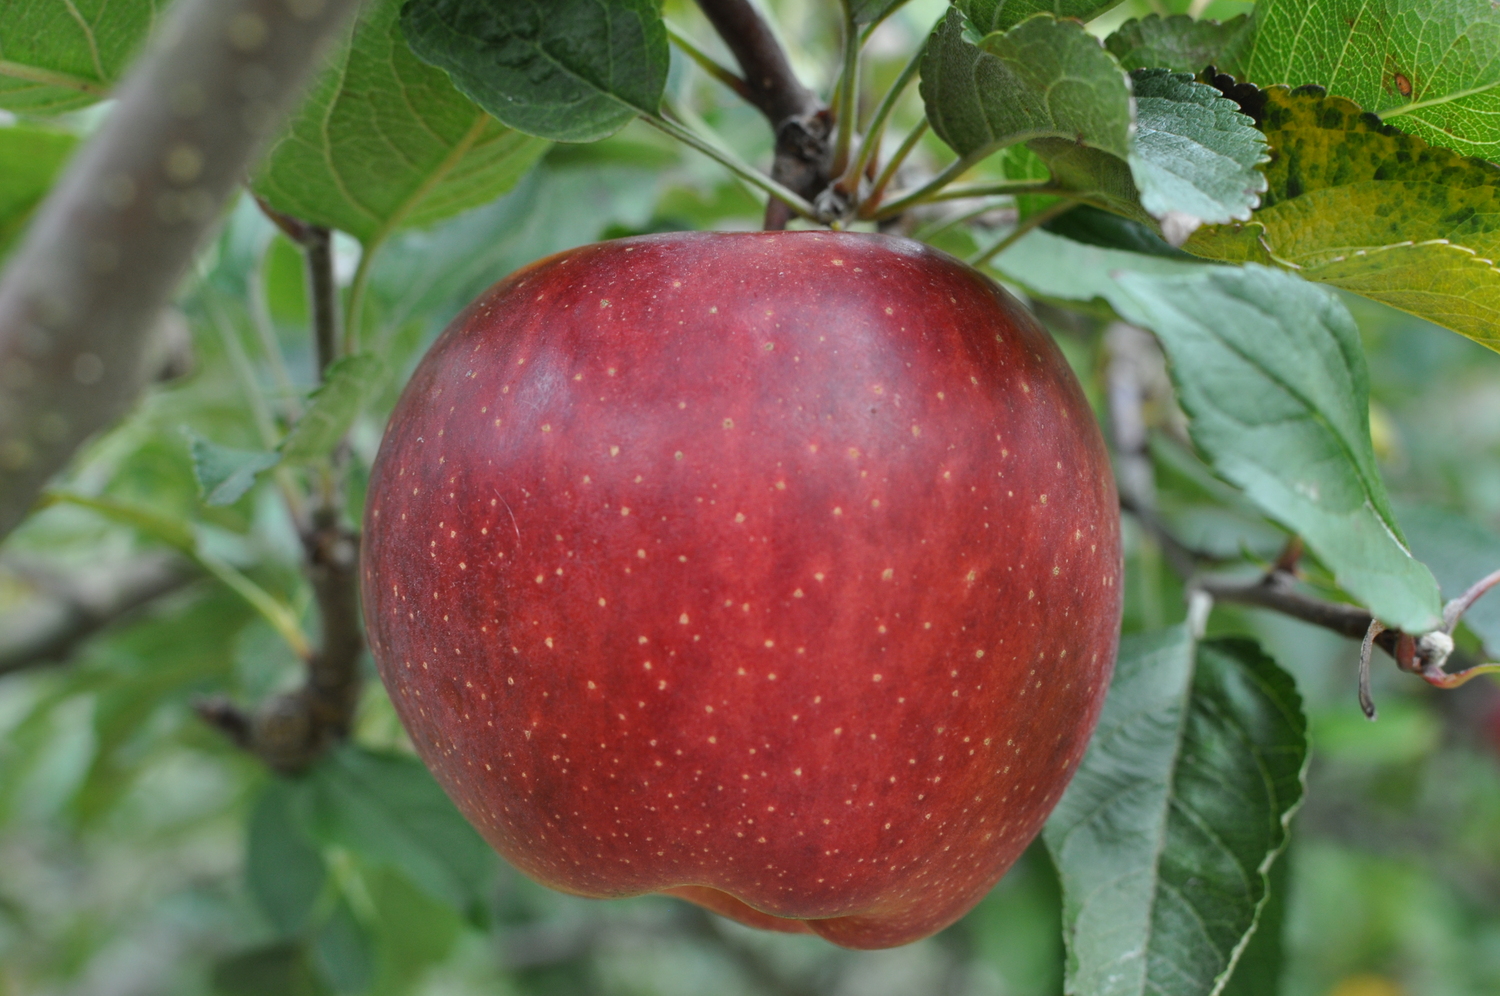 After nearly four months from blooming this unblemished, organically grow apple is ripe for the picking. Mouthwatering indeed from a 75-year-old tree. ANDREW MESSINGER